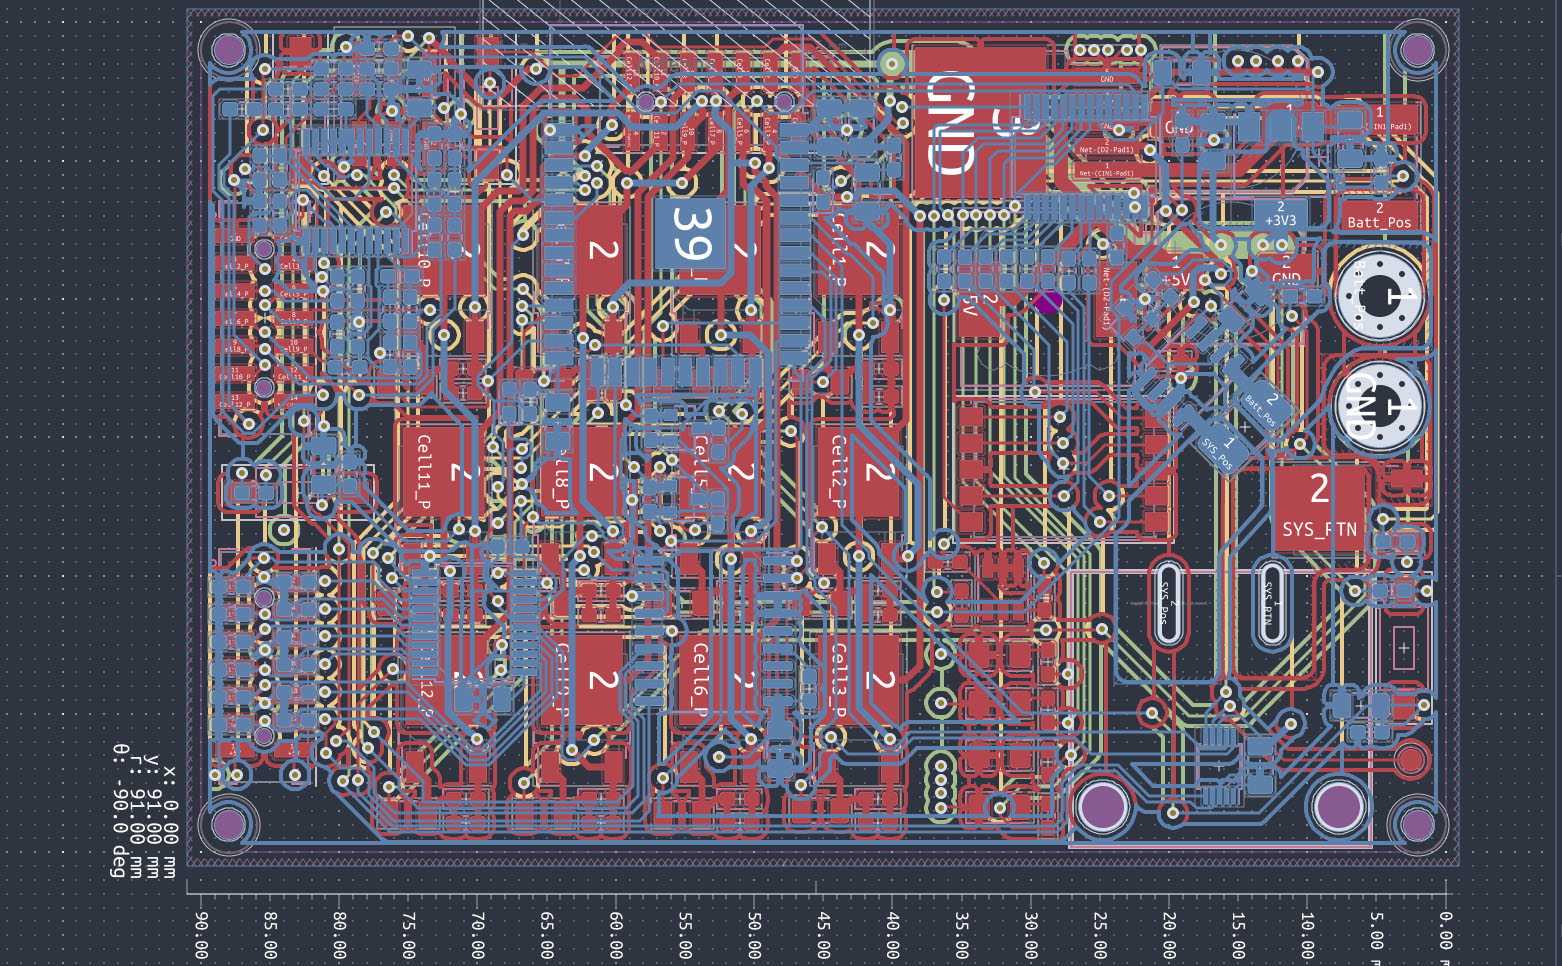 All four layers of my PCB. I think it shows the mayhem pretty well lol